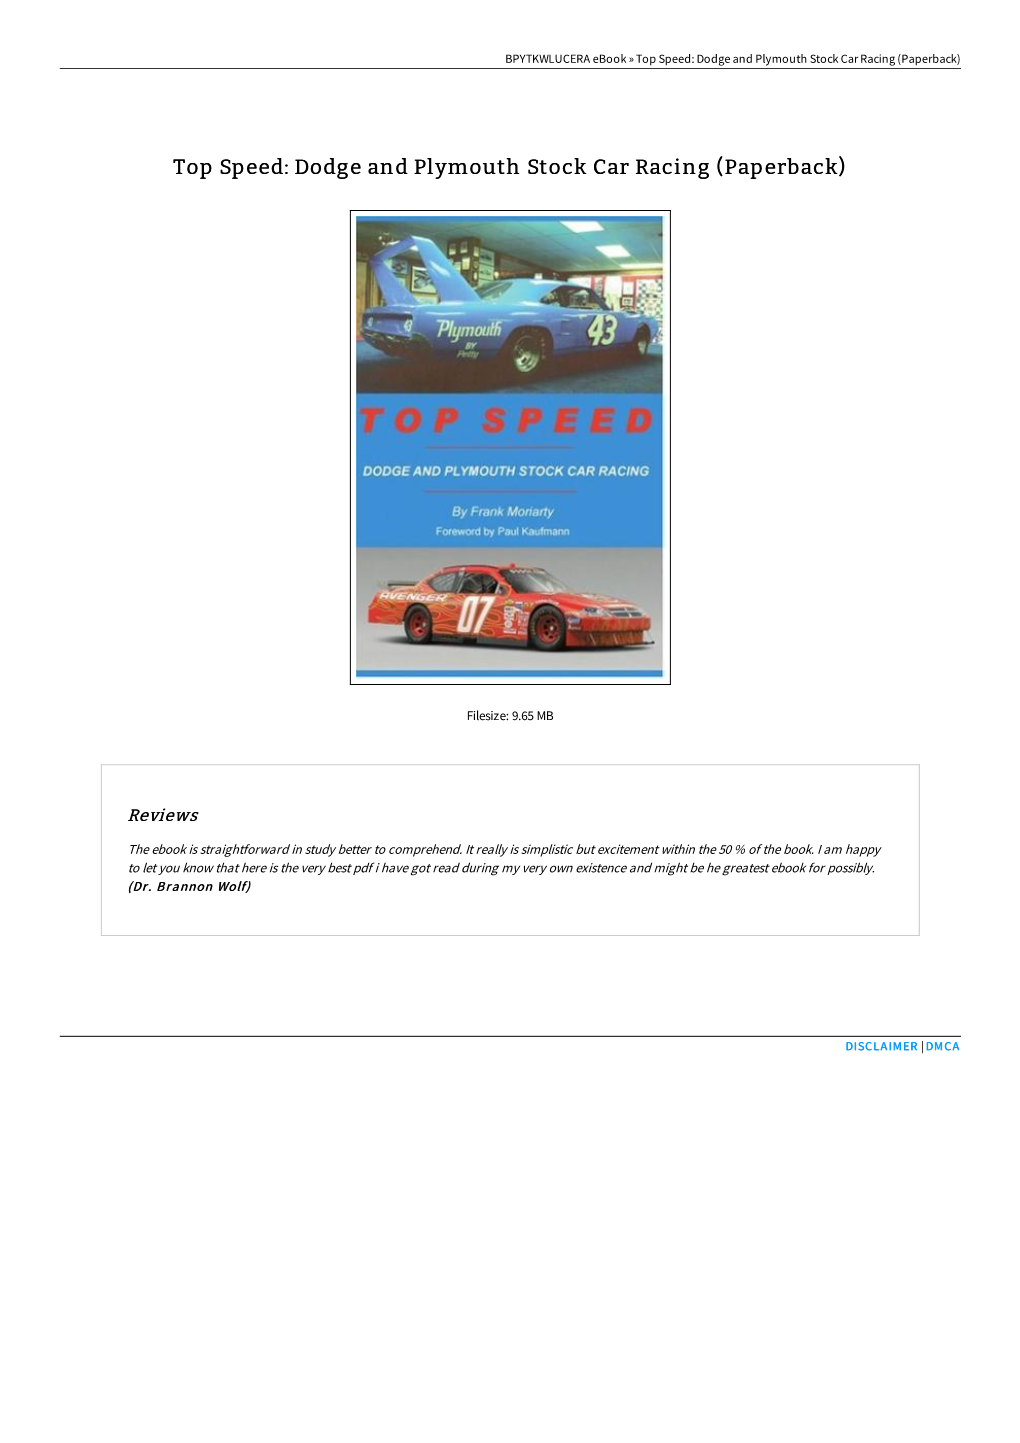 Top Speed: Dodge and Plymouth Stock Car Racing (Paperback)